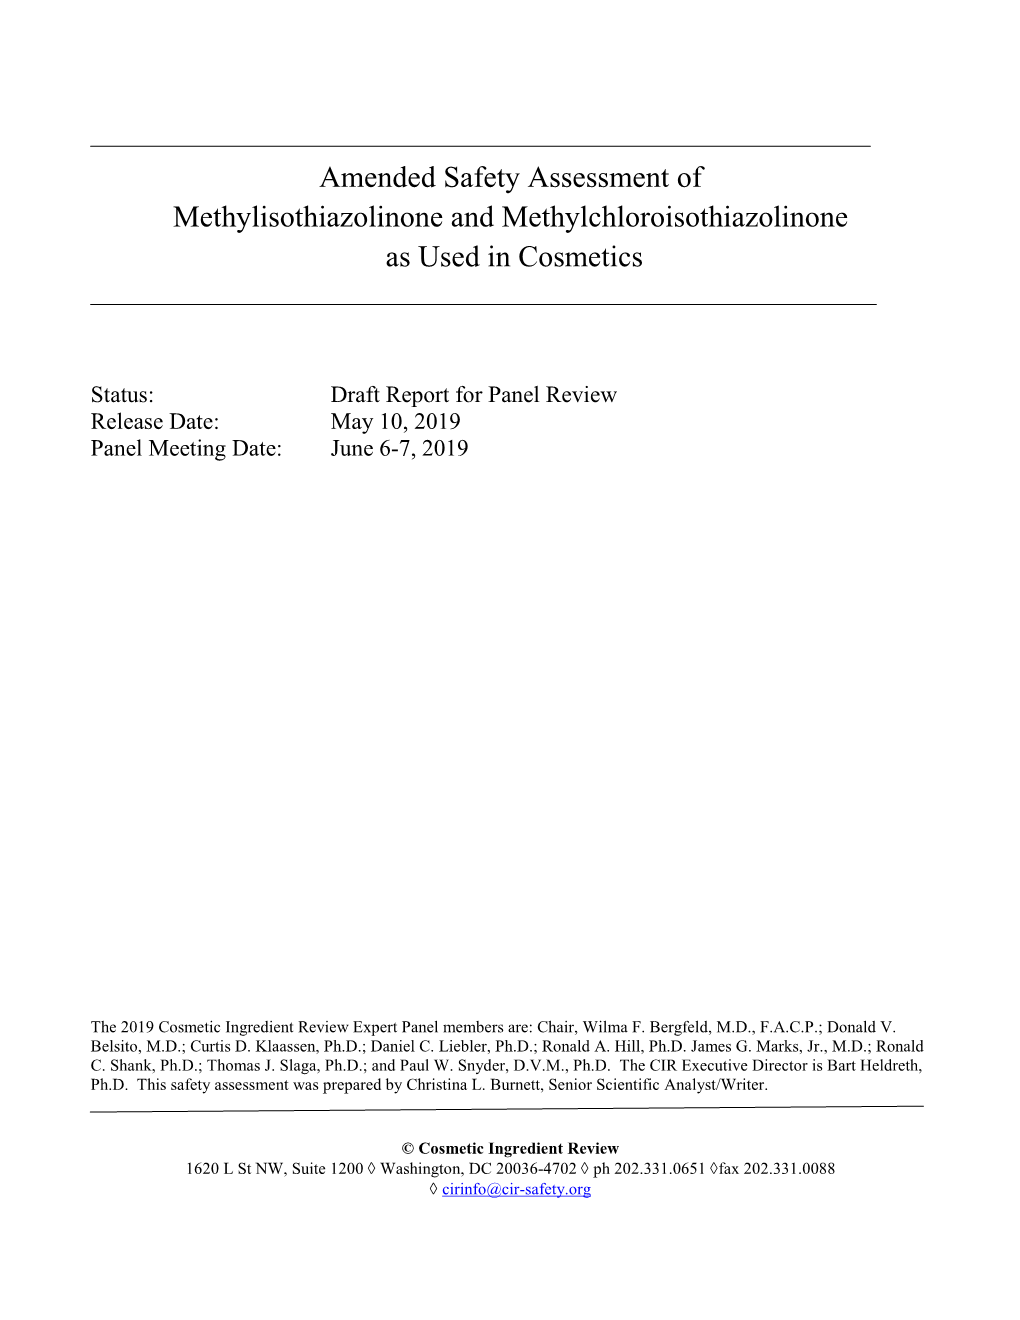 Amended Safety Assessment of Methylisothiazolinone and Methylchloroisothiazolinone As Used in Cosmetics